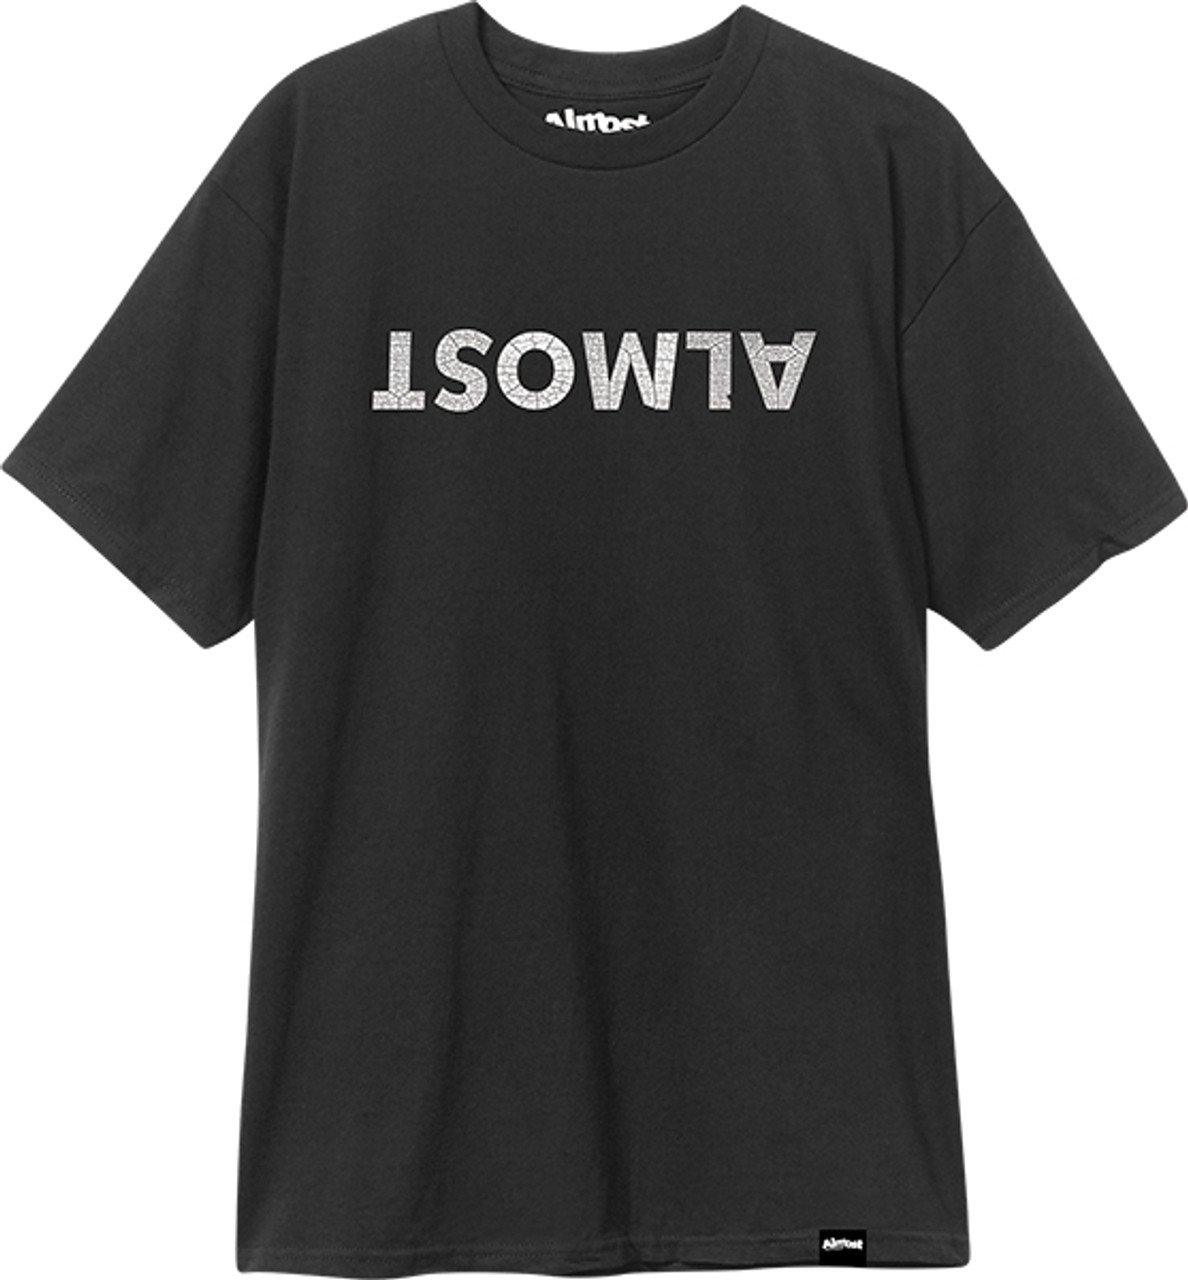 ALMOST CENTER SS TSHIRT SMALL BLACK